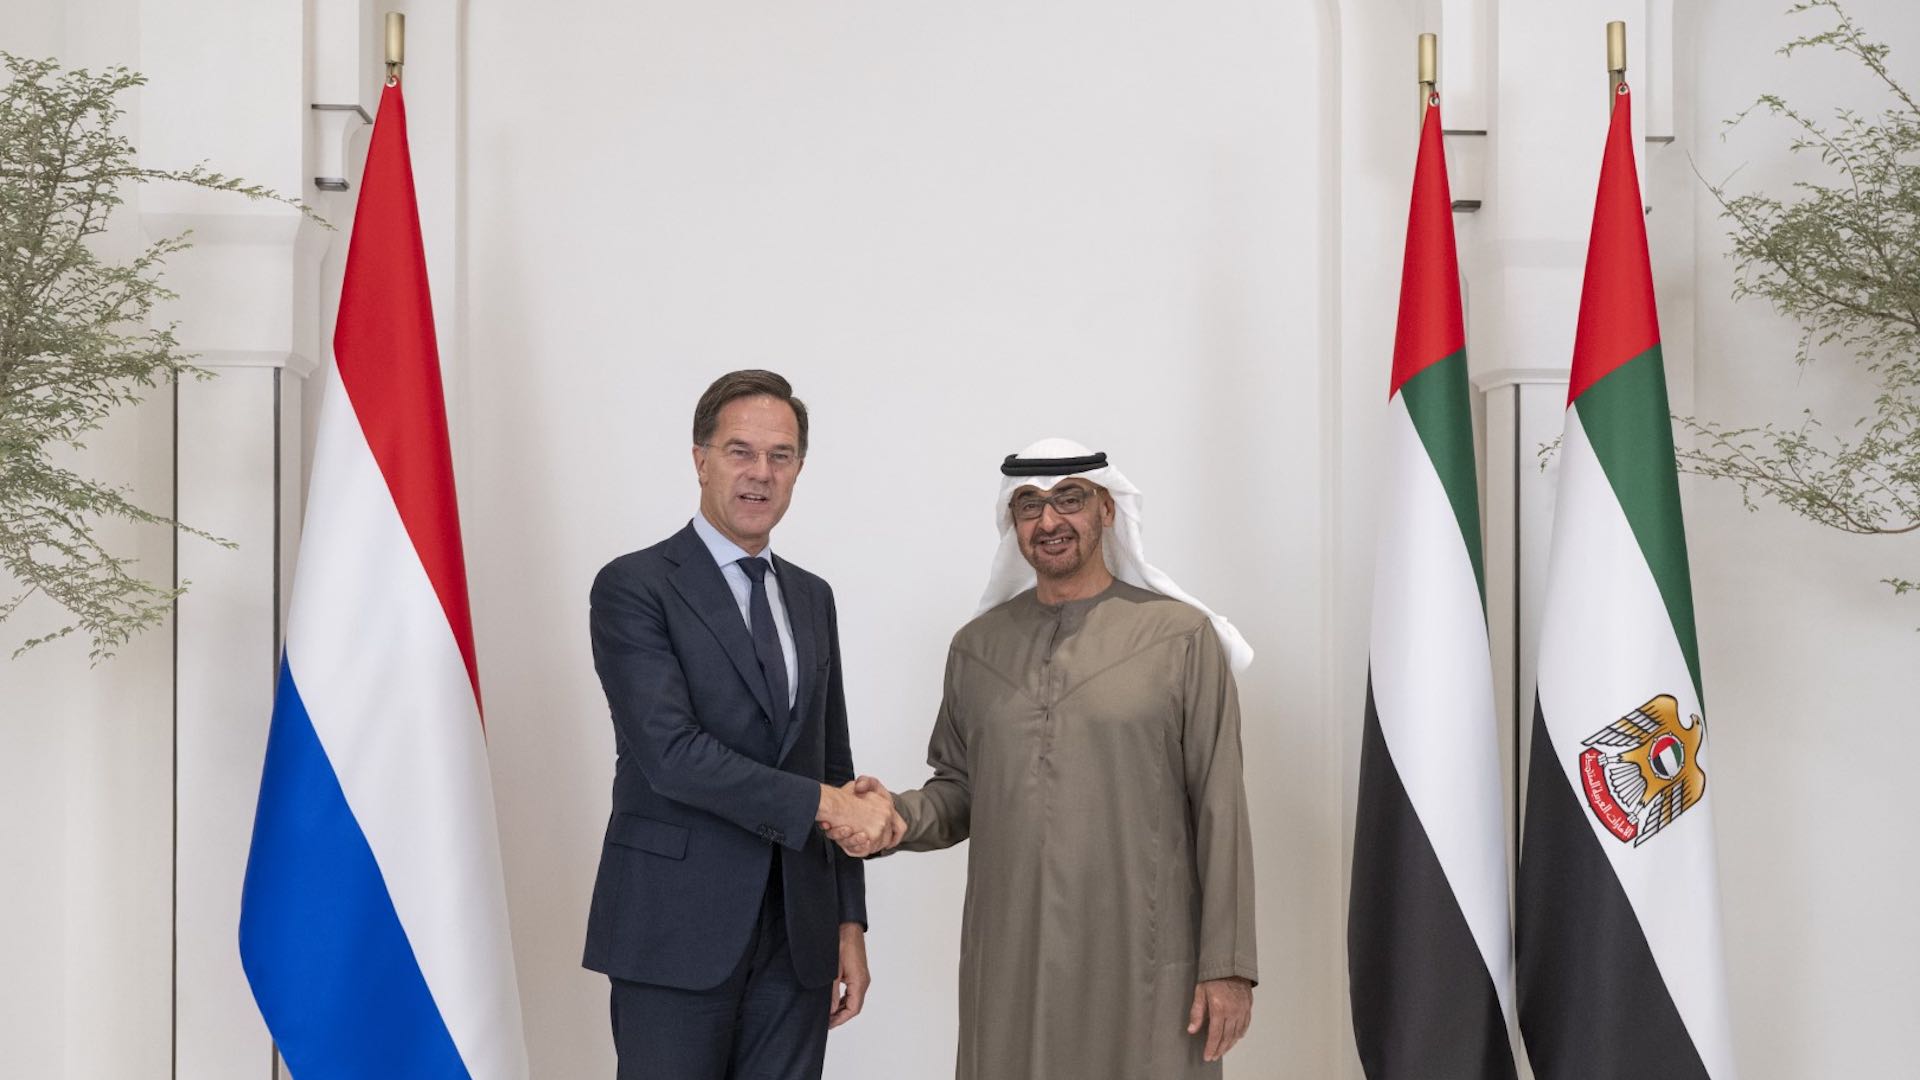 Leaders of UAE and Netherlands convene to reinforce mutual cooperation